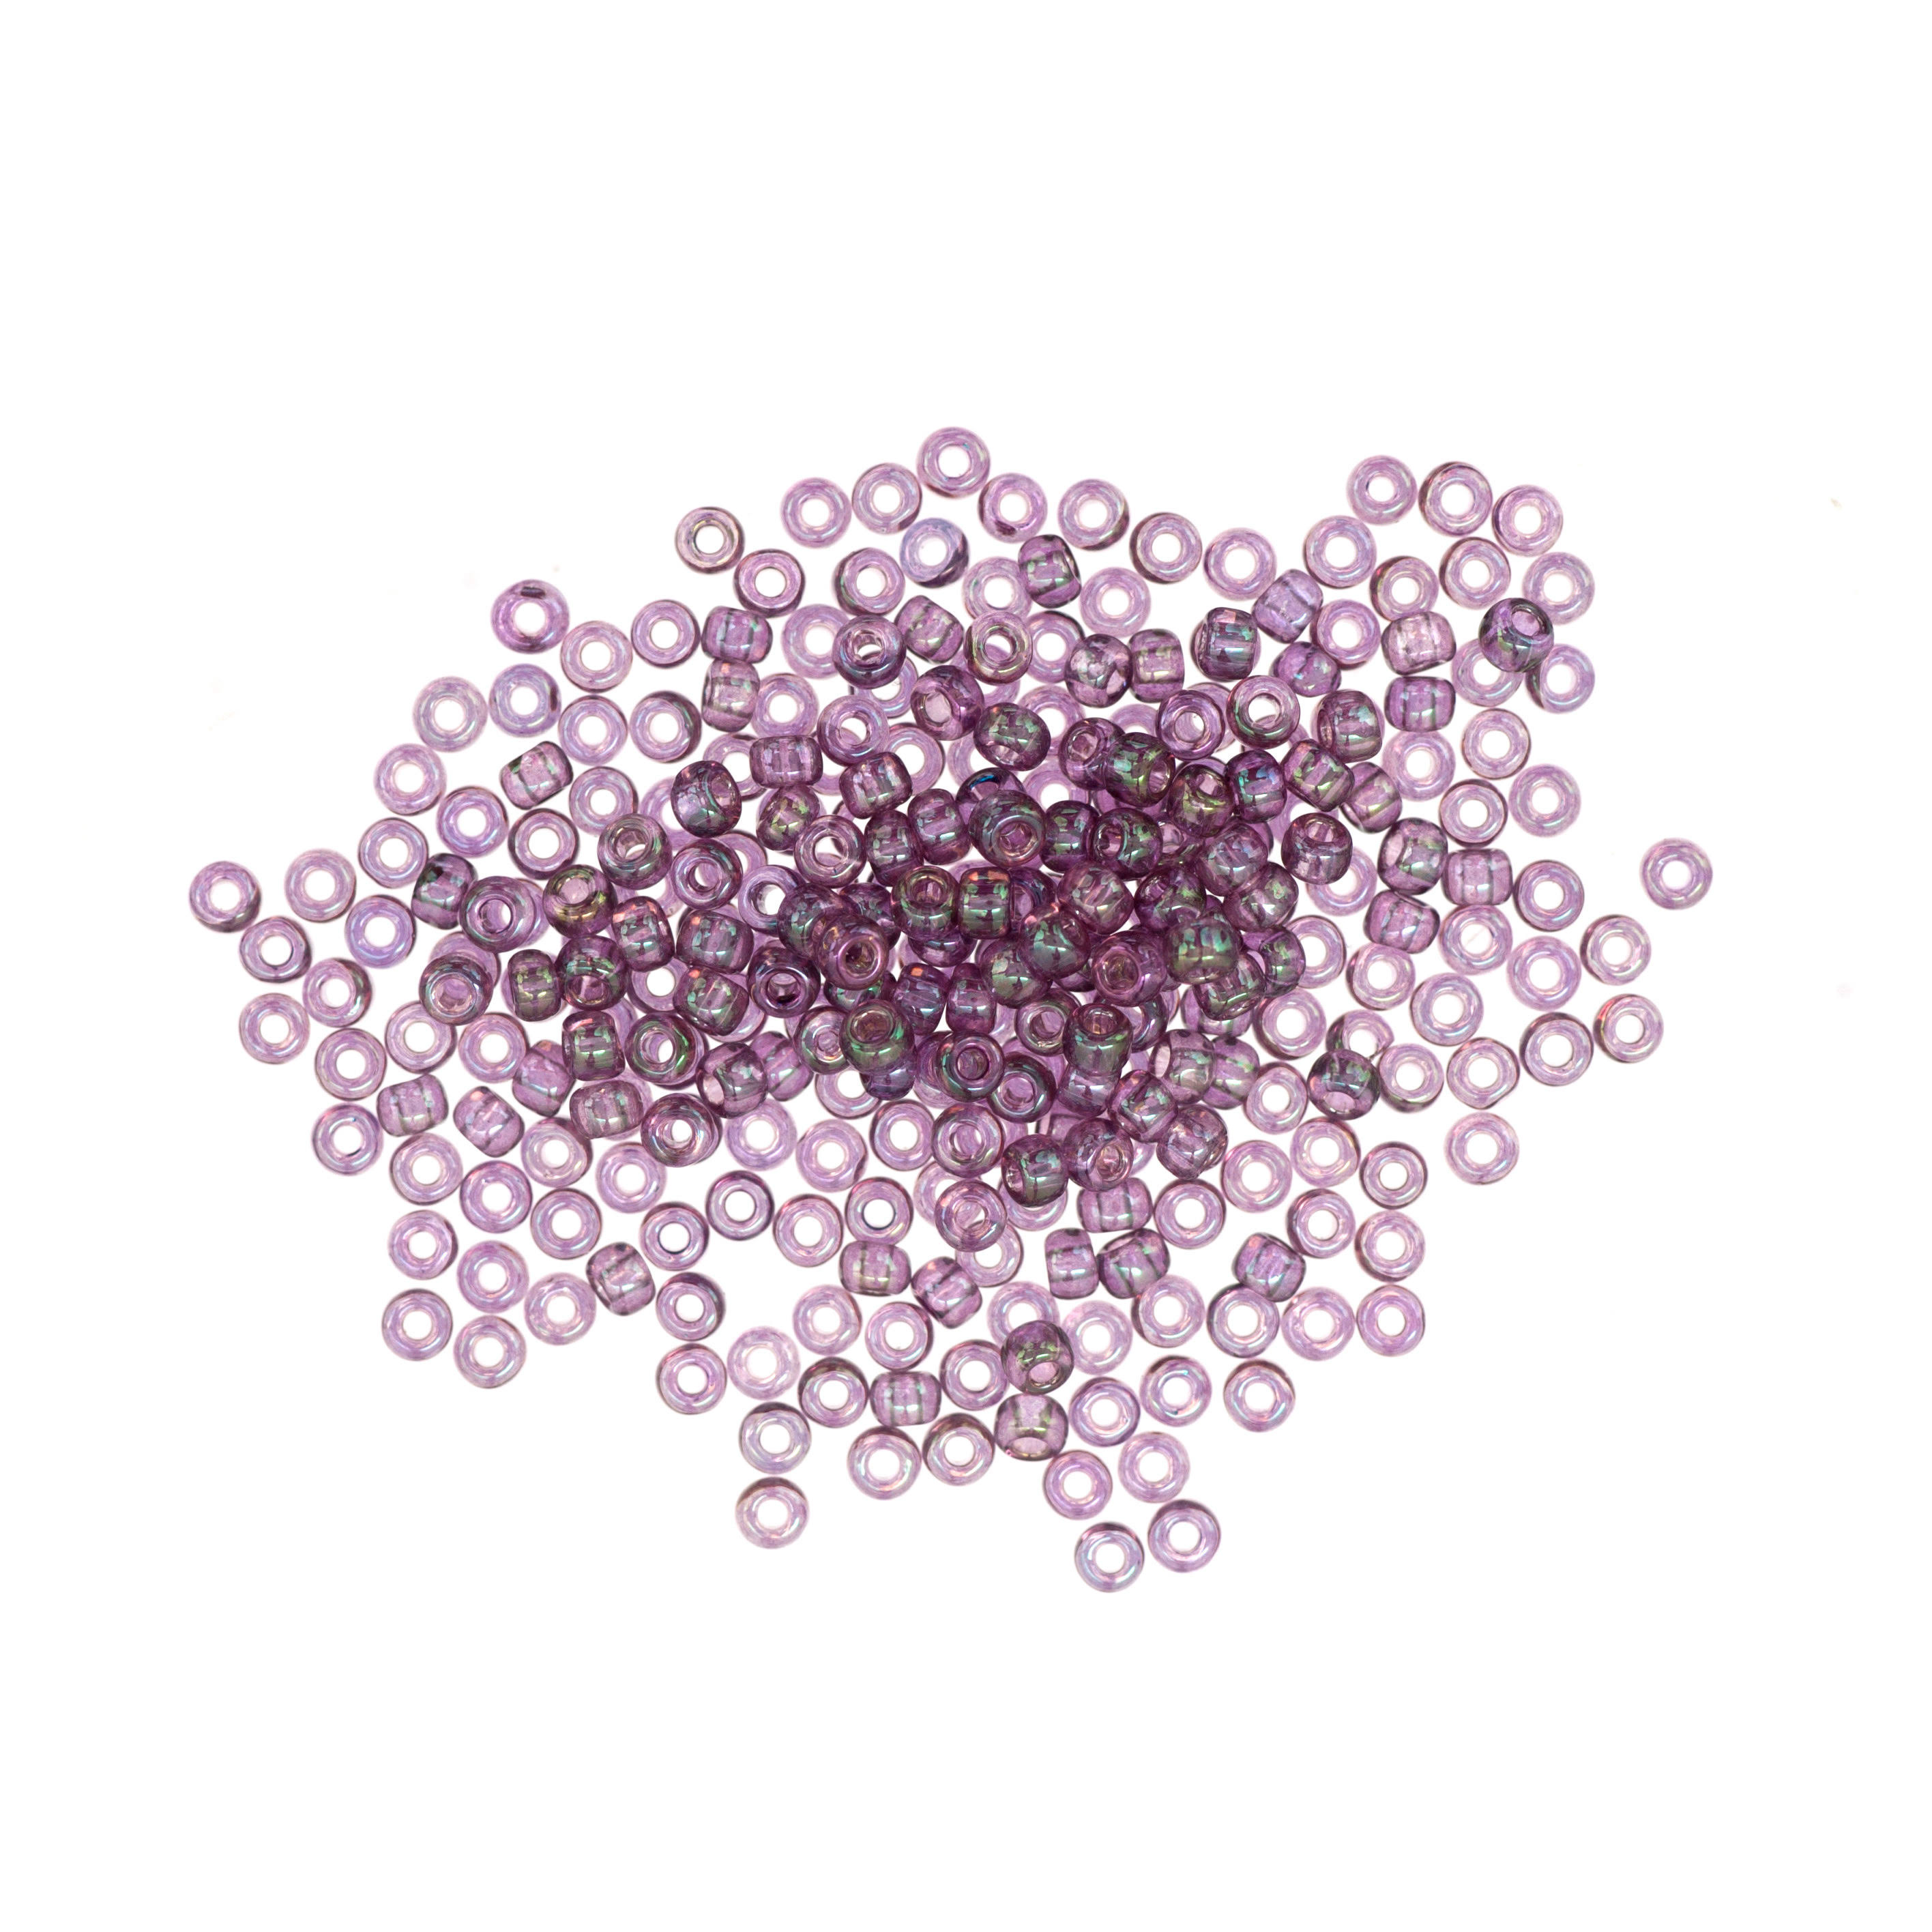 Mill Hill Seed Beads - 00206 - Violet